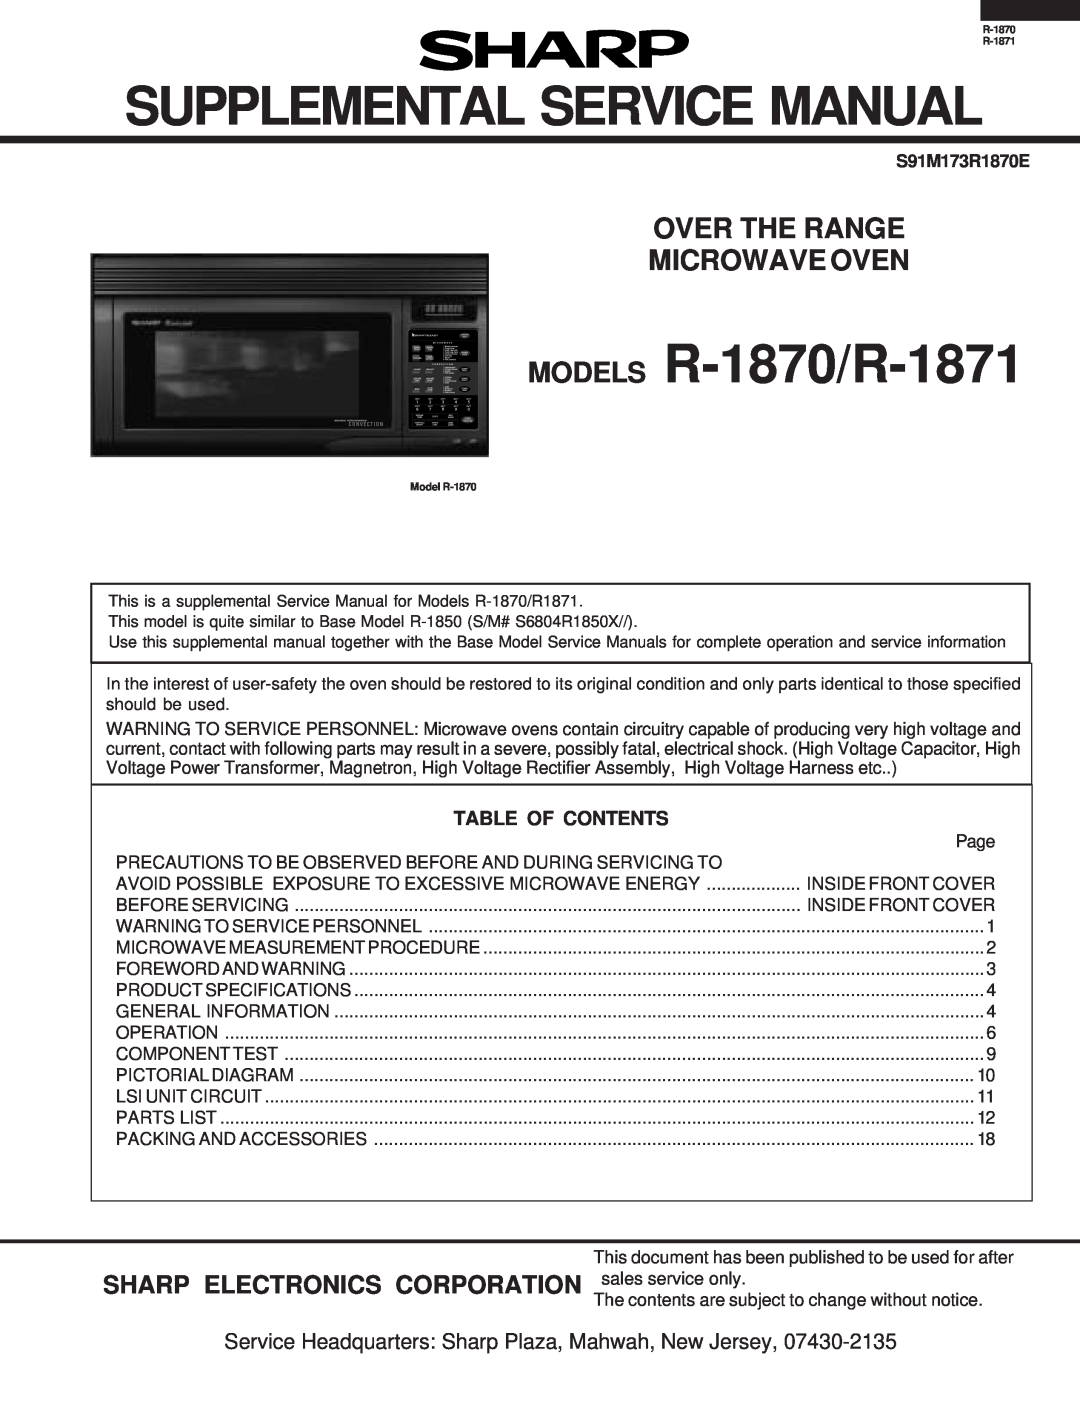 Sharp service manual SHARP ELECTRONICS CORPORATION sales service only, Table Of Contents, MODELS R-1870/R-1871 